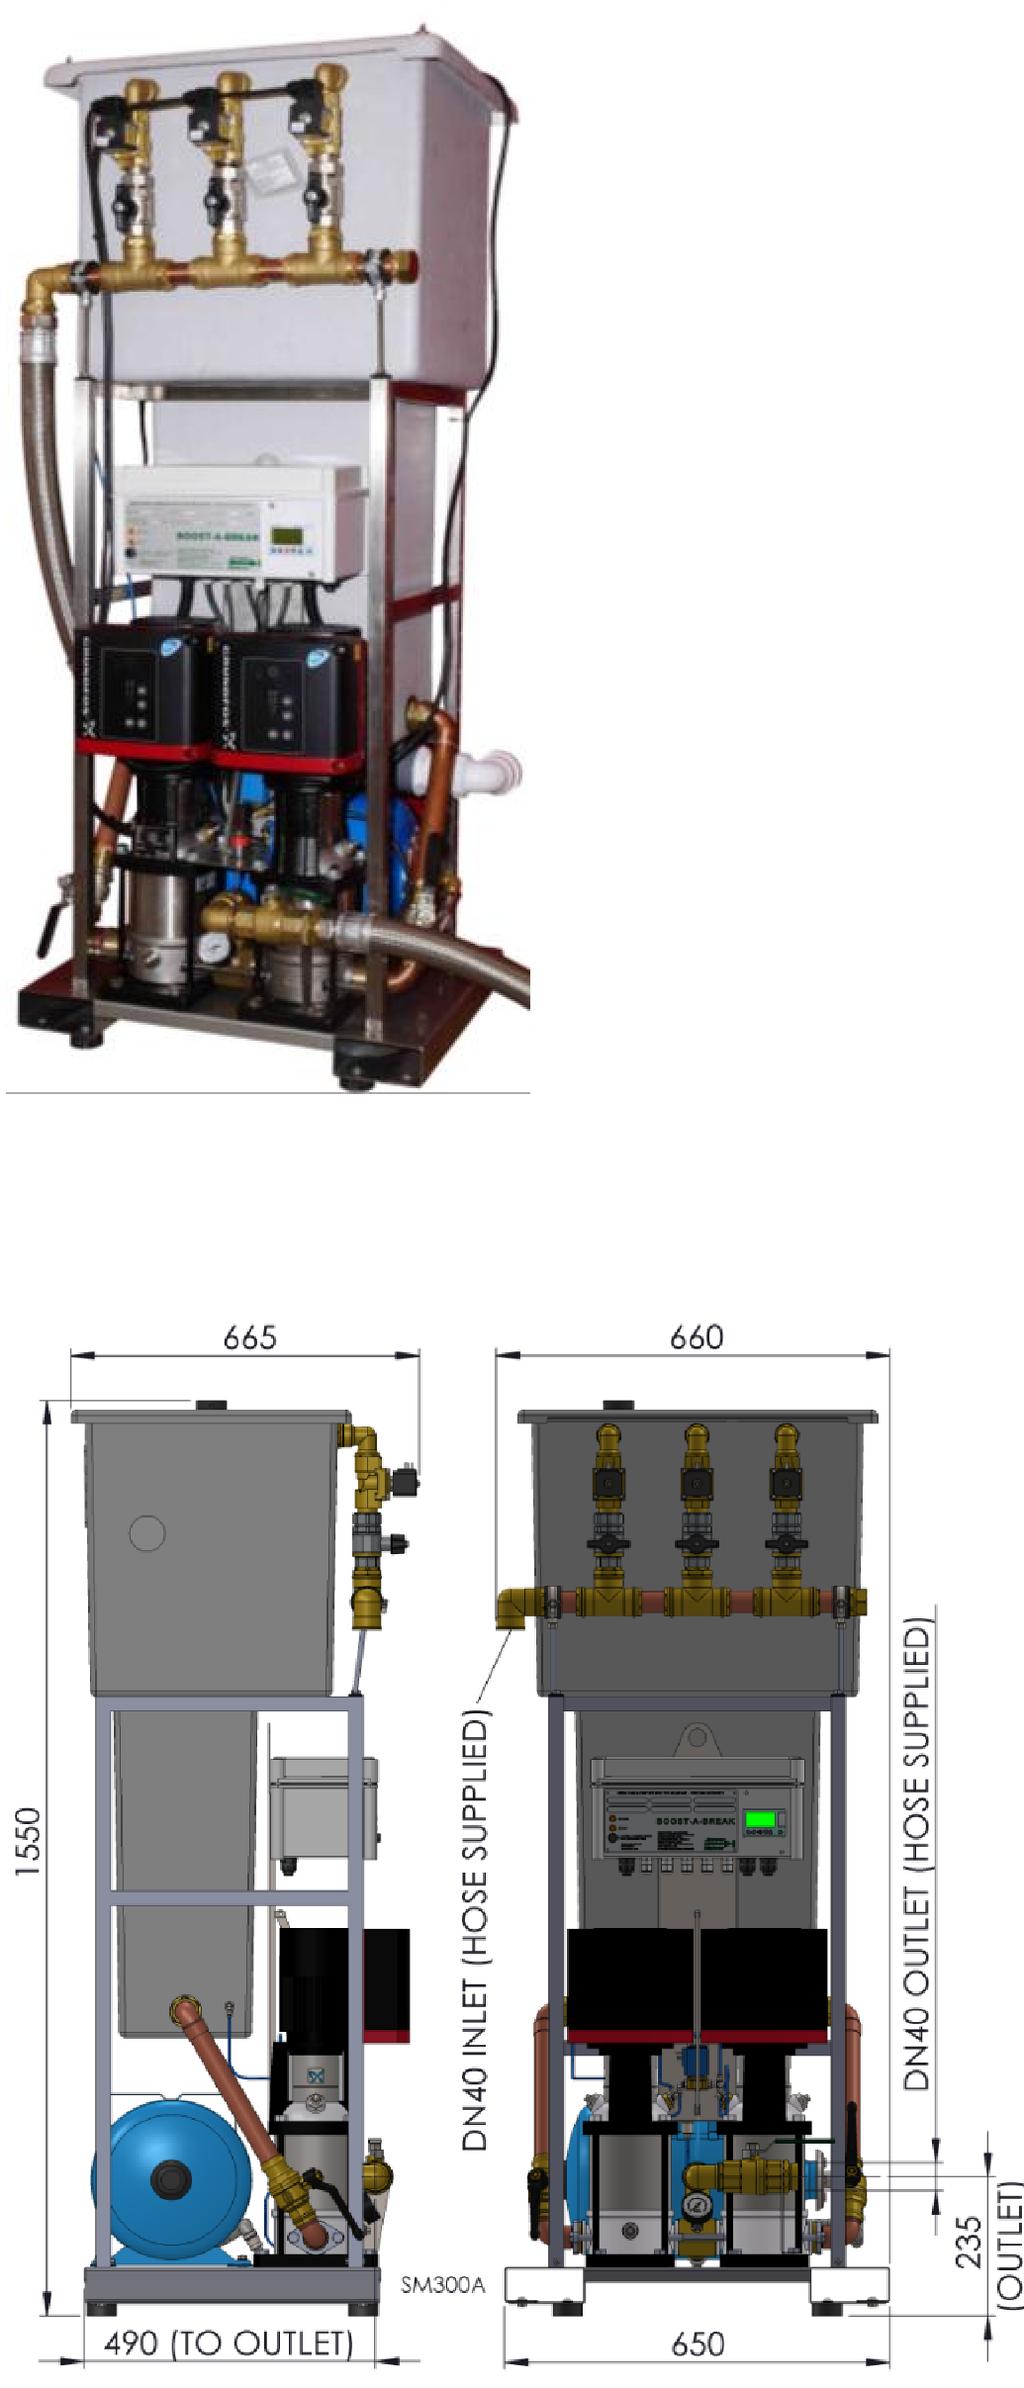 5m² of floor space and allows the unit to be easily and securely transported. The integral 100 litre GRP break tank is rapidly filled by a triple solenoid valve arrangement.